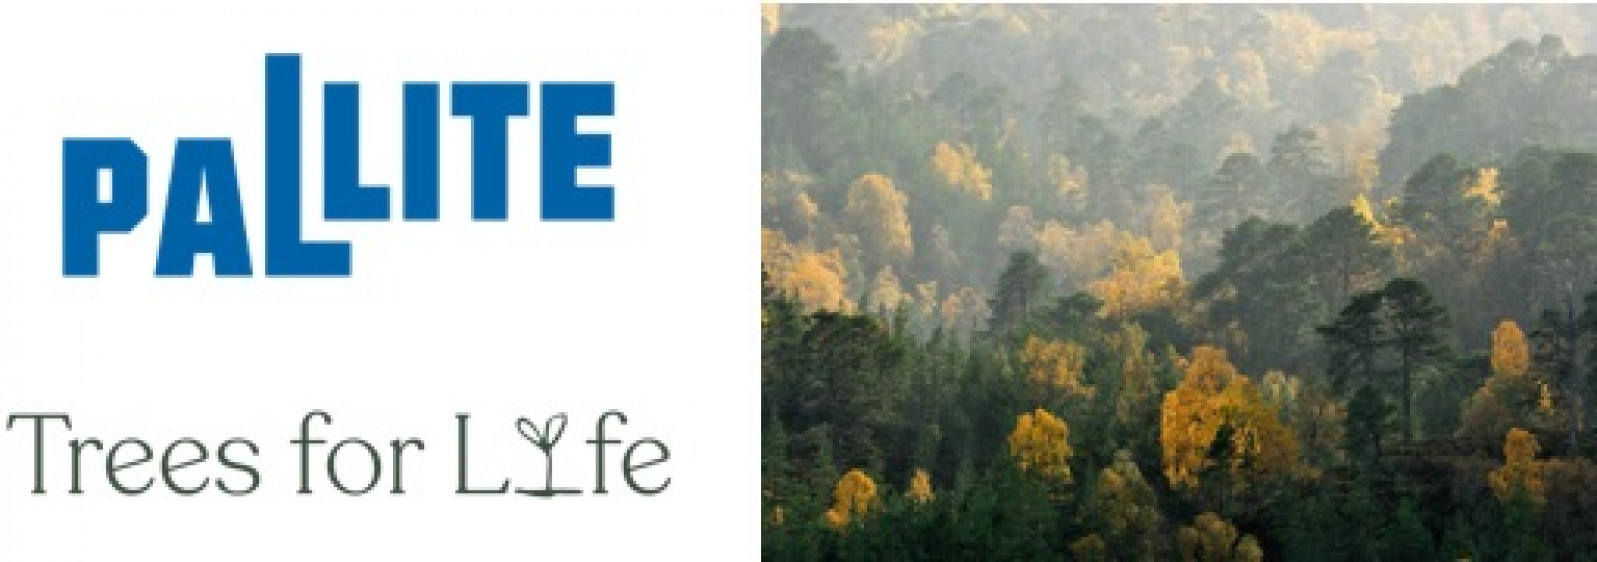 PALLITE® PLANTS 2,000 TREES AS PART OF NATIONAL TR...